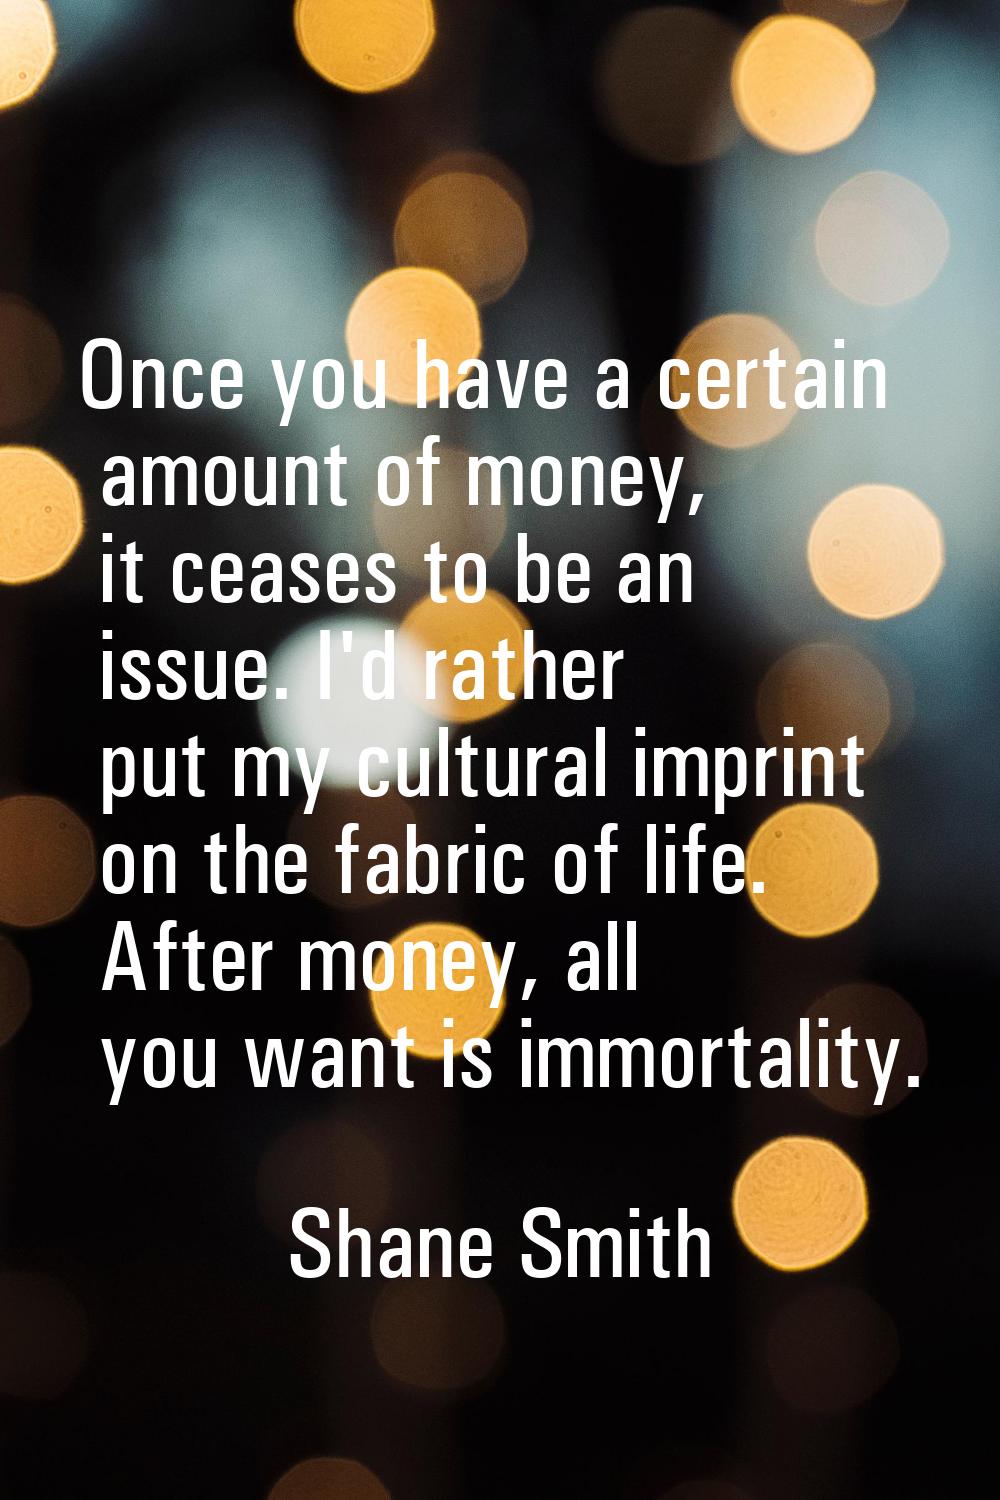 Once you have a certain amount of money, it ceases to be an issue. I'd rather put my cultural impri